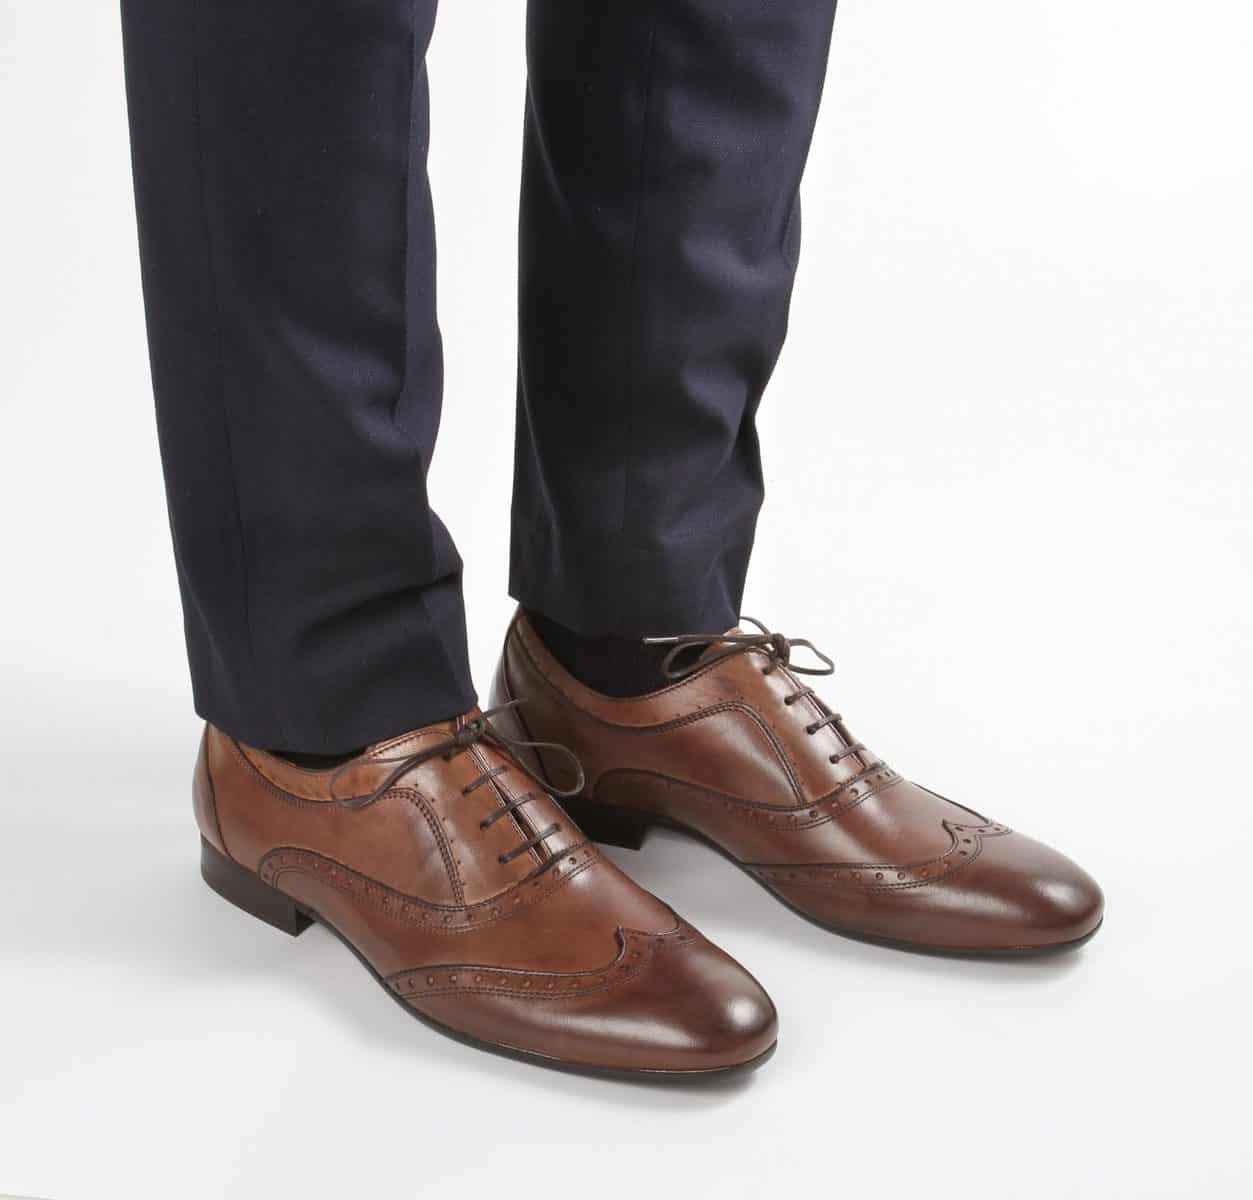 Is It Ever OK To Wear Brown Shoes With Black Pants?